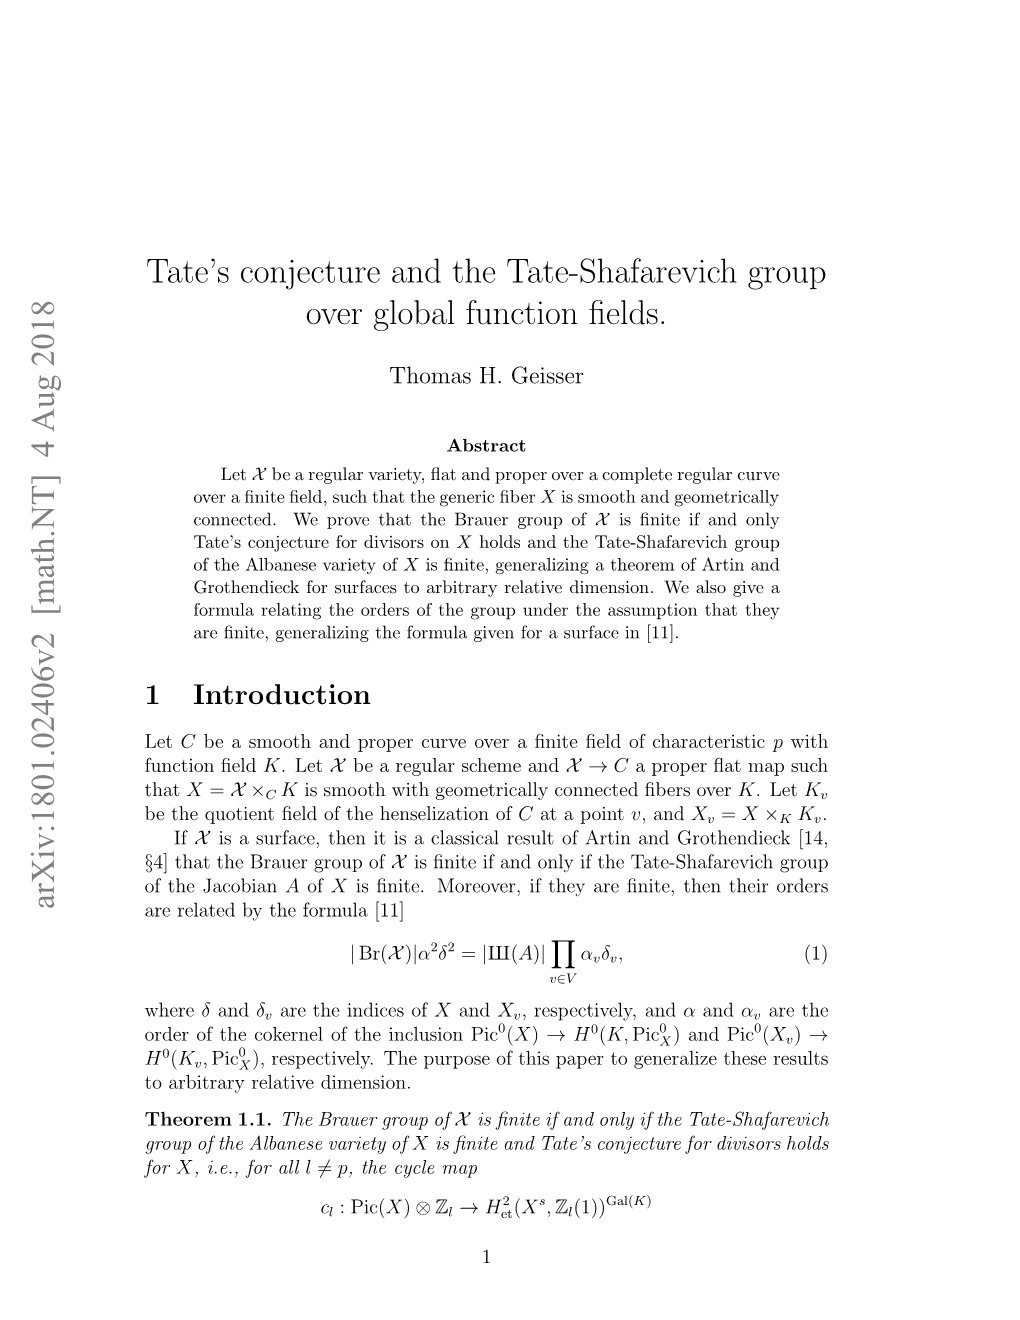 Tate's Conjecture and the Tate-Shafarevich Group Over Global